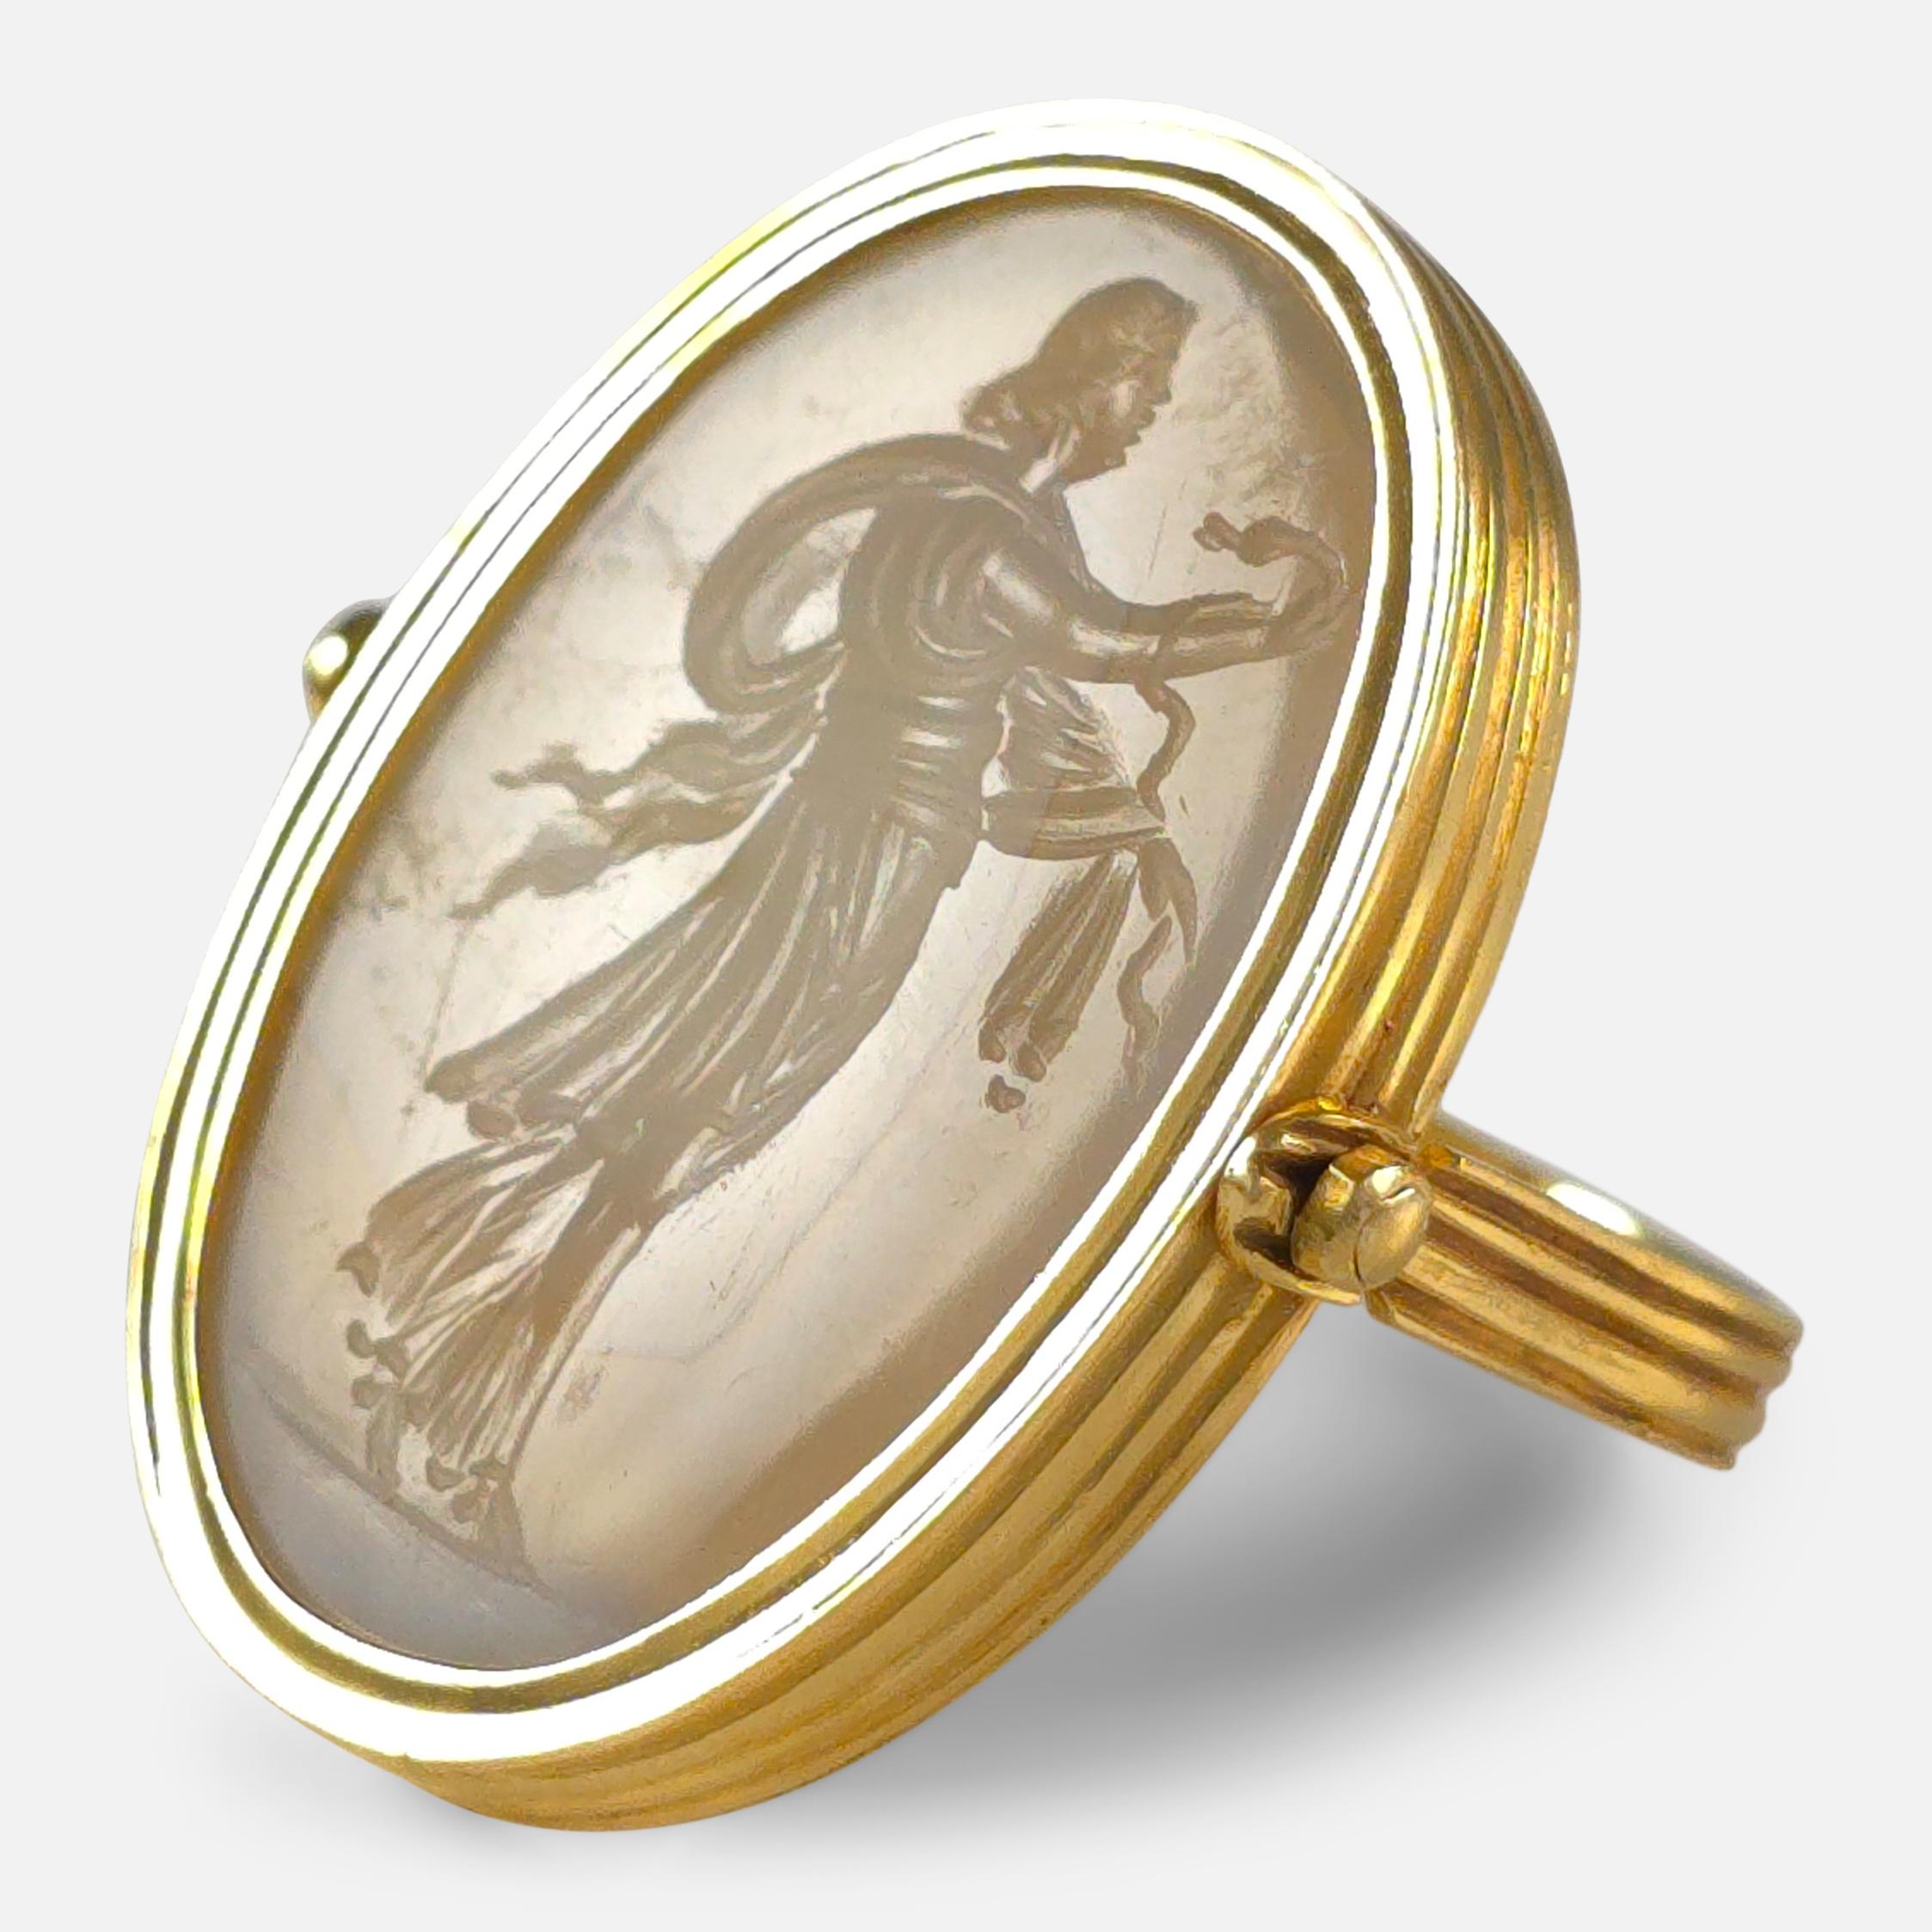 Early 19th century neoclassical intaglio ring set in 18ct gold, featuring a pale oval agate engraved with Hygieia, the goddess of health, holding a snake, set in a swivel mount with a fluted half-hoop.

• Period: Early 19th Century
• Date: Circa